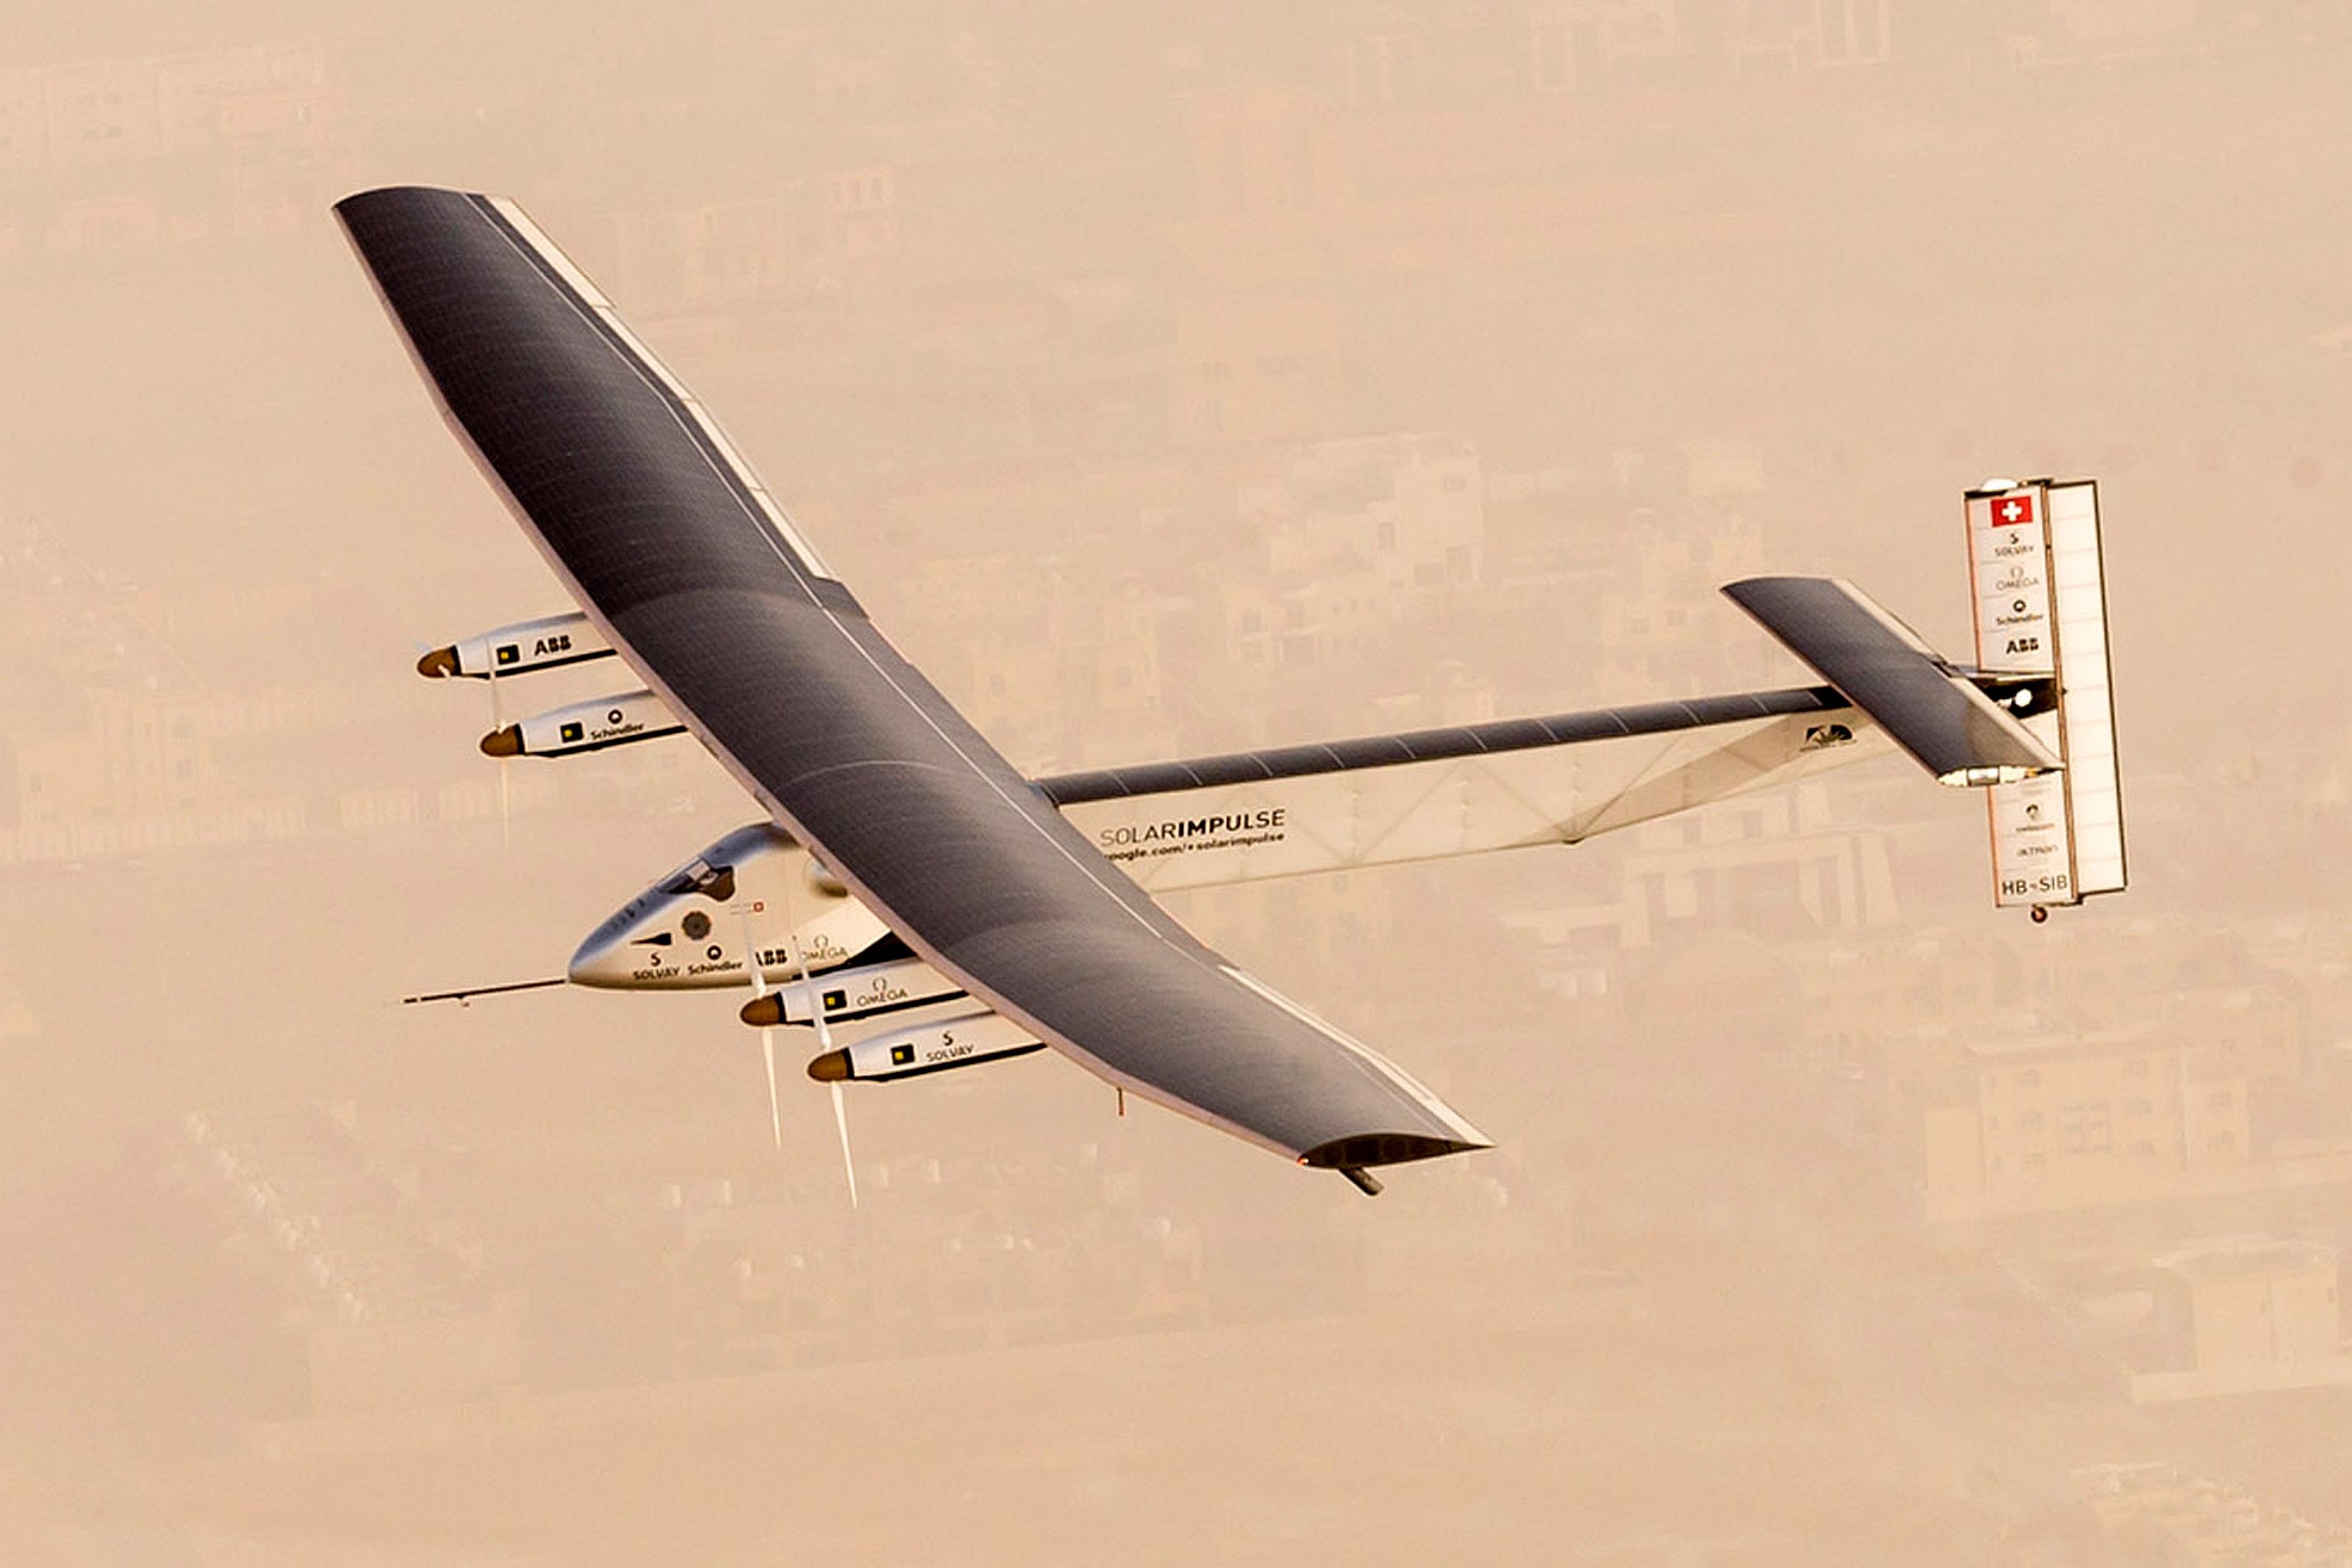 Solar-powered plane gets stuck in China | CNN Business